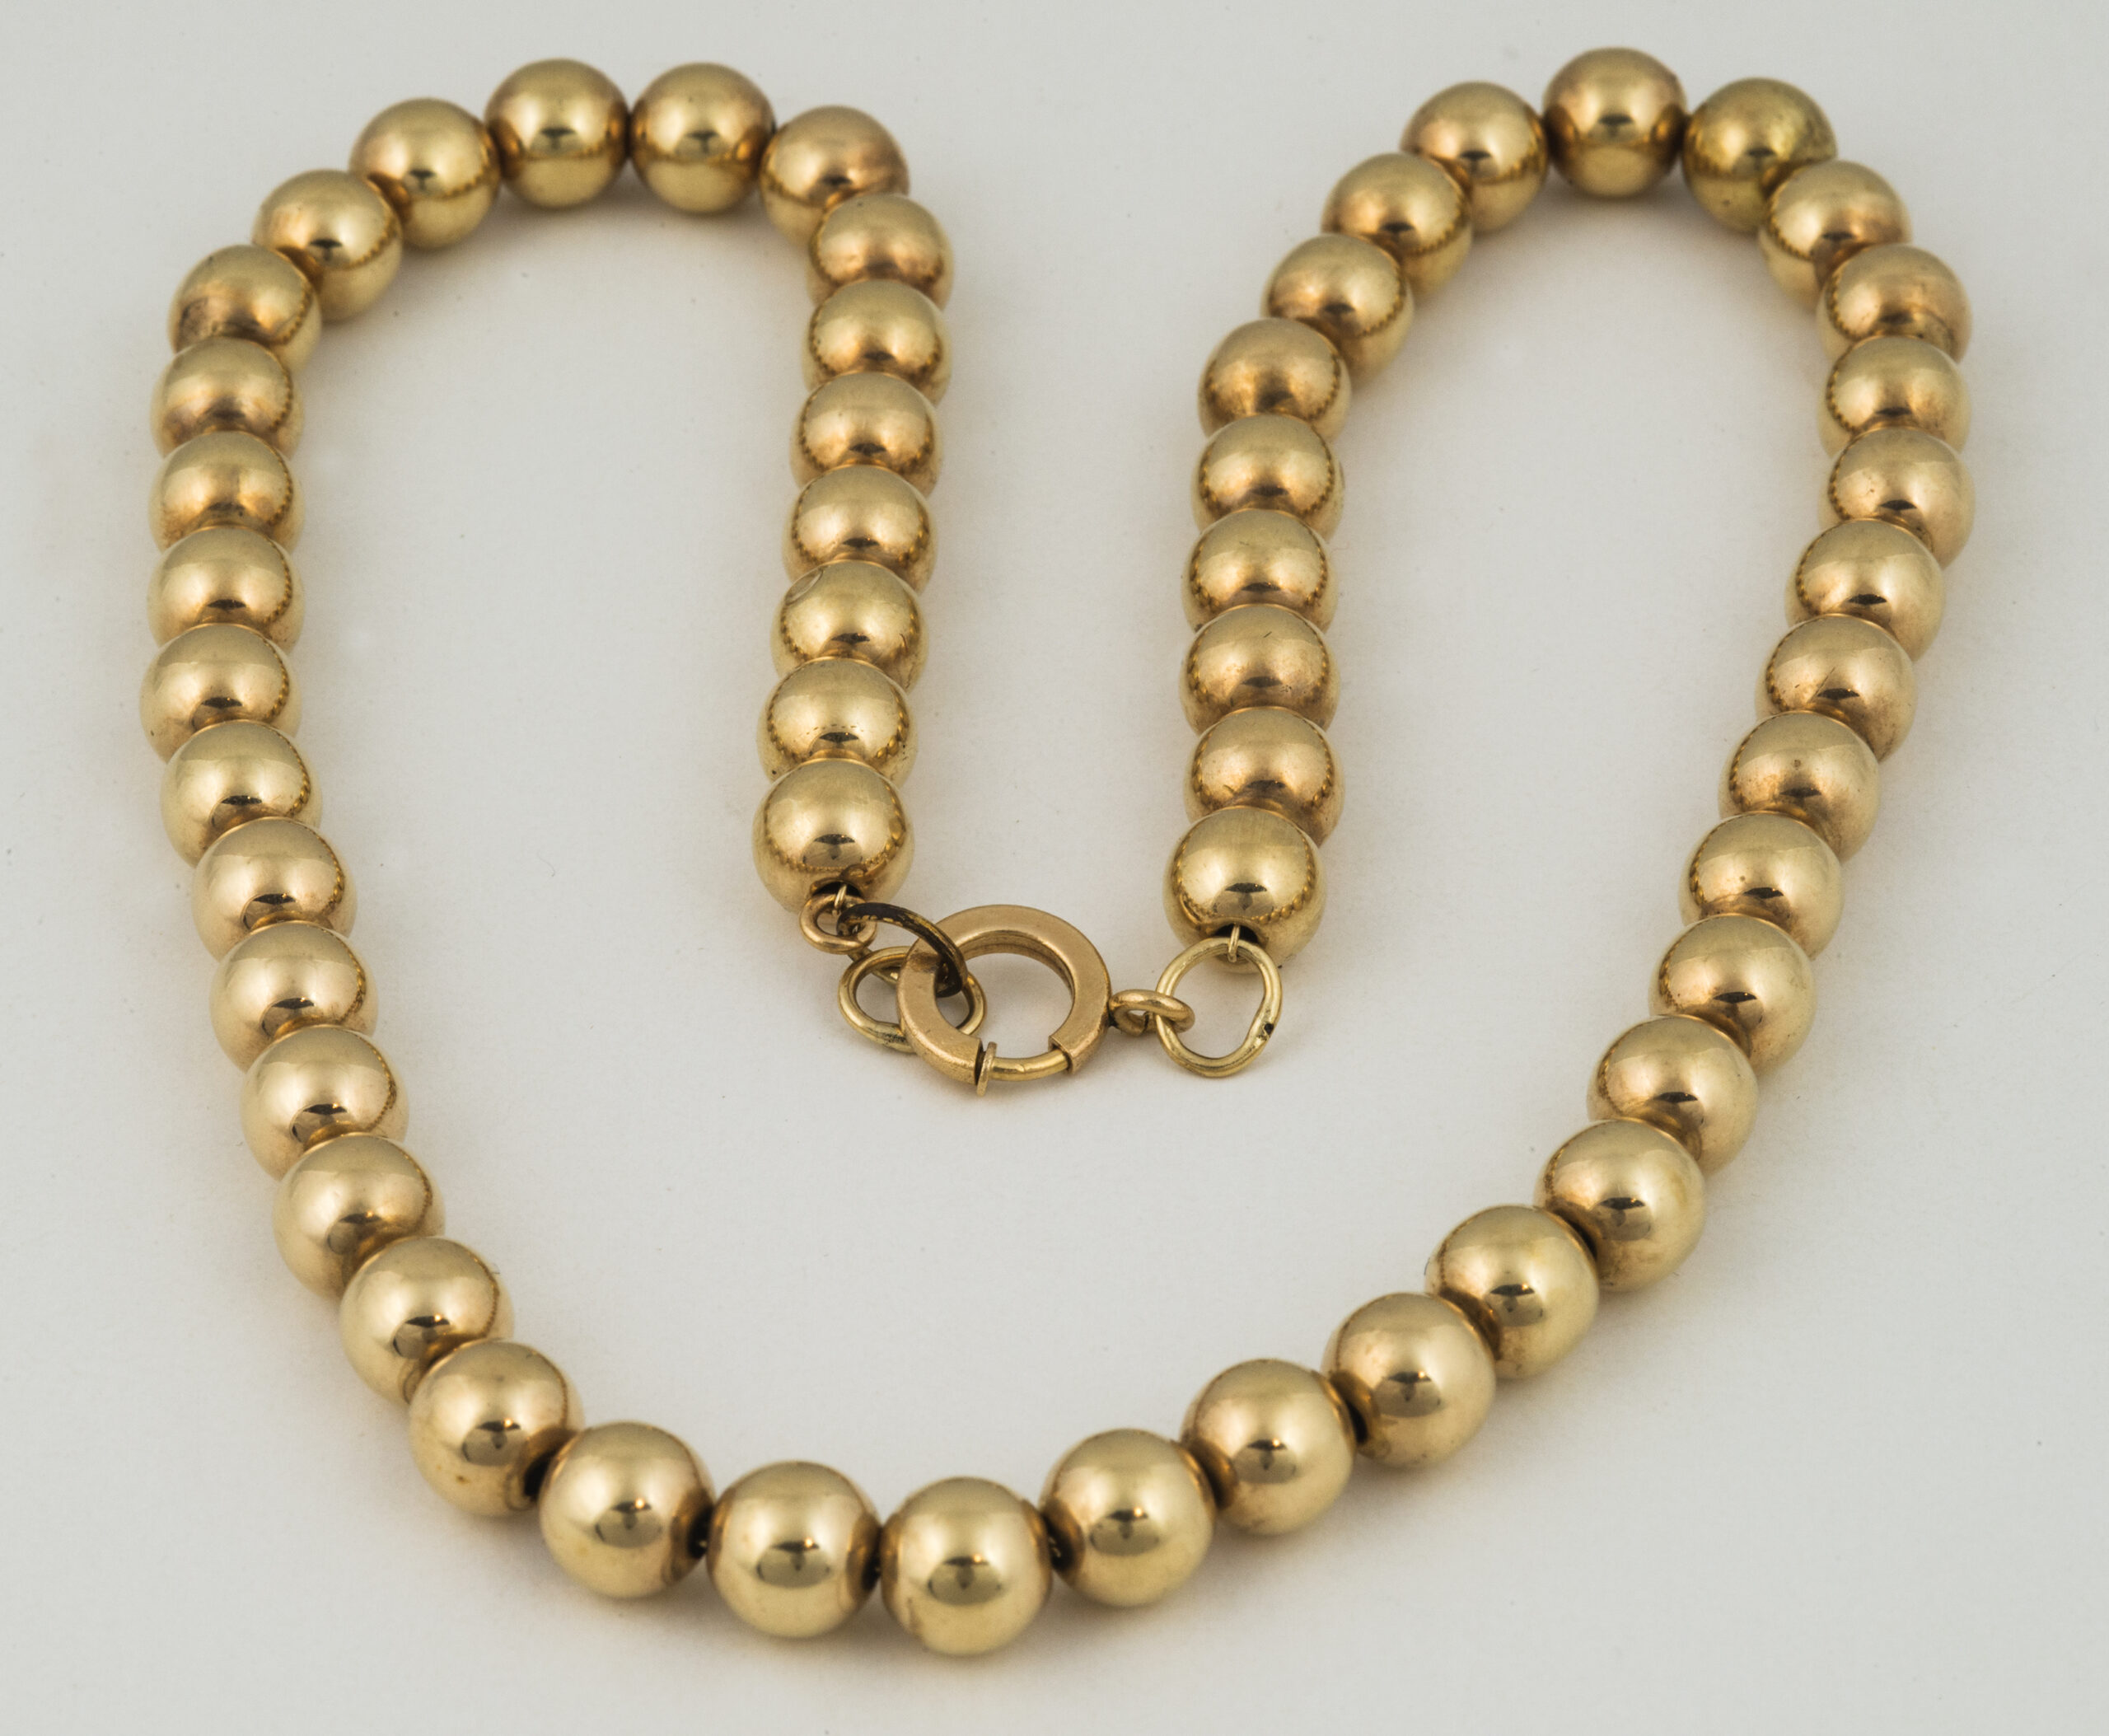 Lot 95: 14K Gold Bead Necklace – Willis Henry Auctions, Inc.